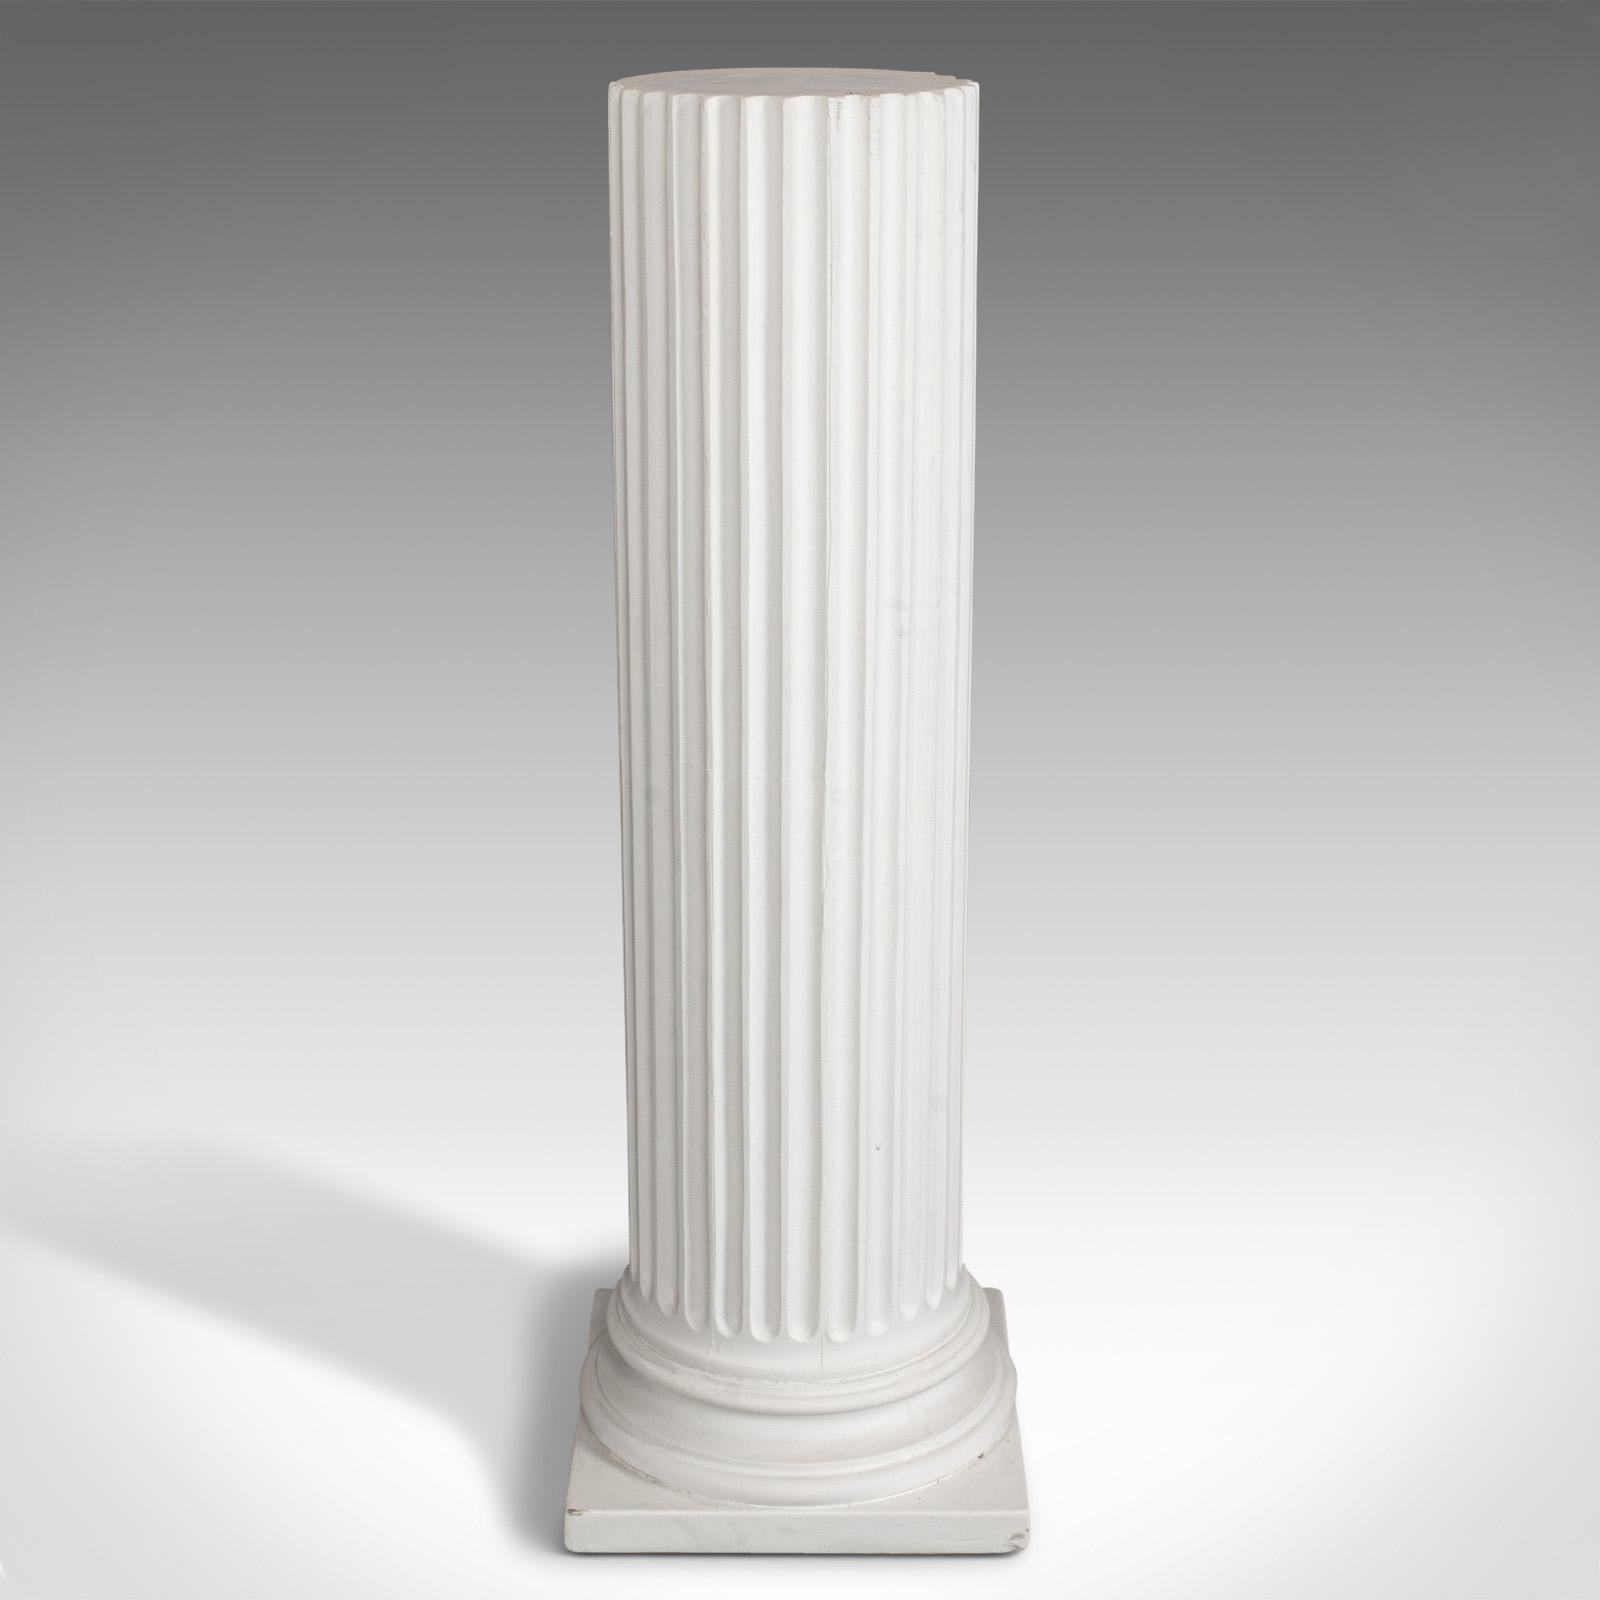 This is a vintage Doric column. A English, architectural plaster display base in classical form, dating to the late 20th century.

Pleasing, versatile pillar in classical taste
Displays a desirable aged patina
Some marks to corners of